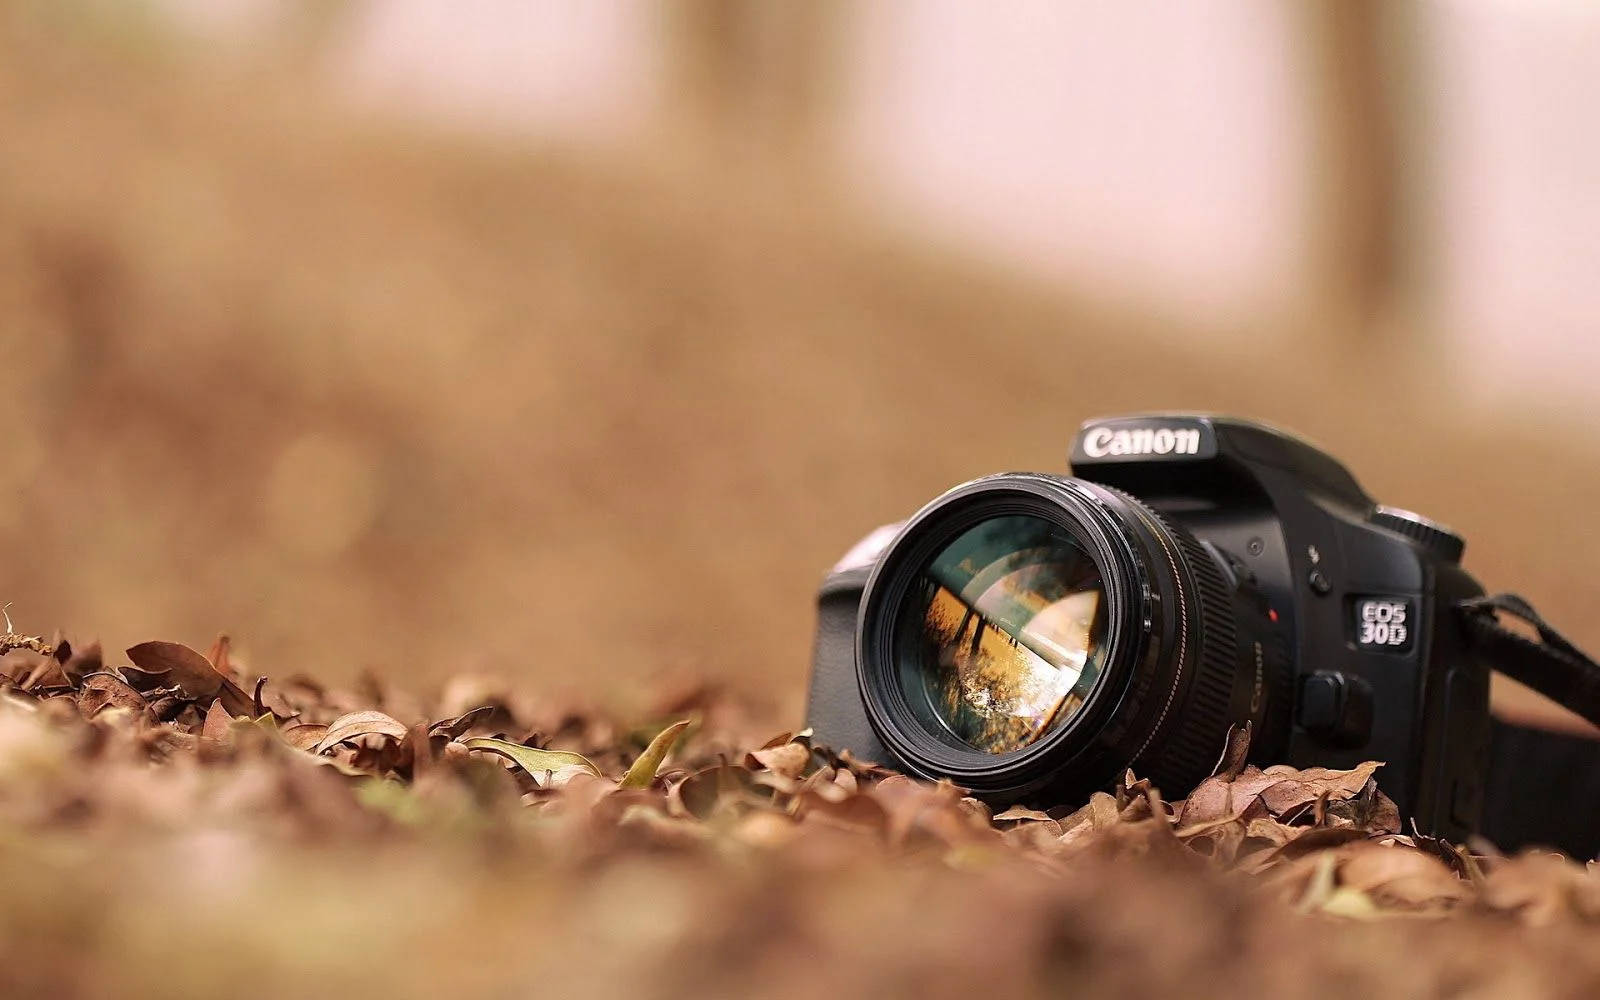 Hd Photography Of Camera By The Fallen Leaves